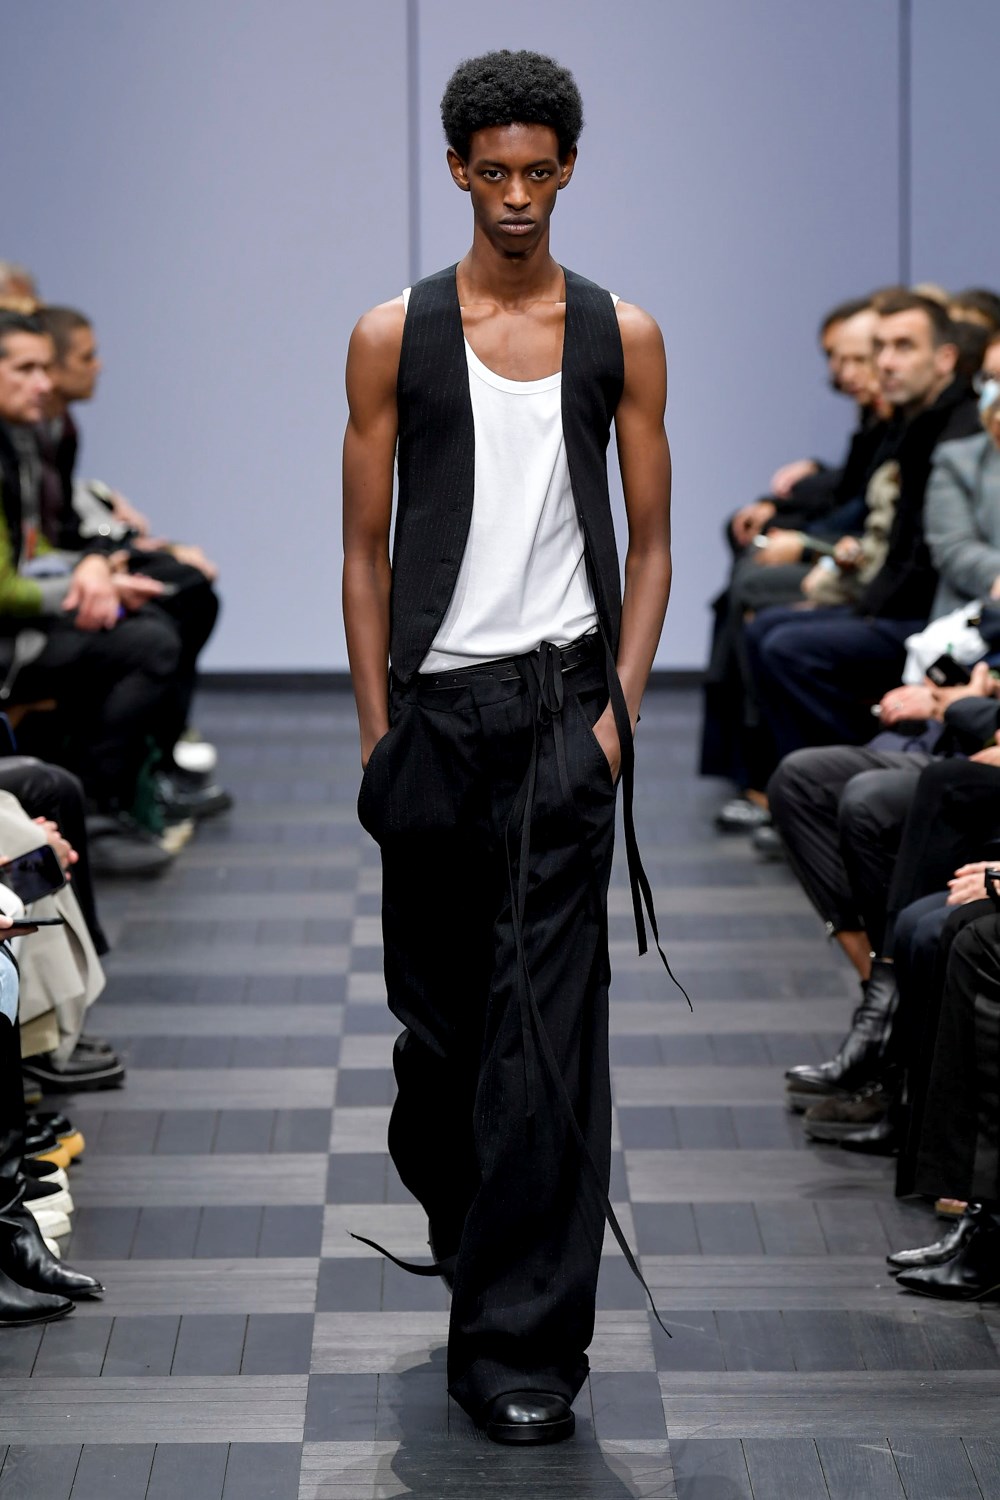 Ann Demeulemeester Spring 2022 Fashion Show Review | The Impression